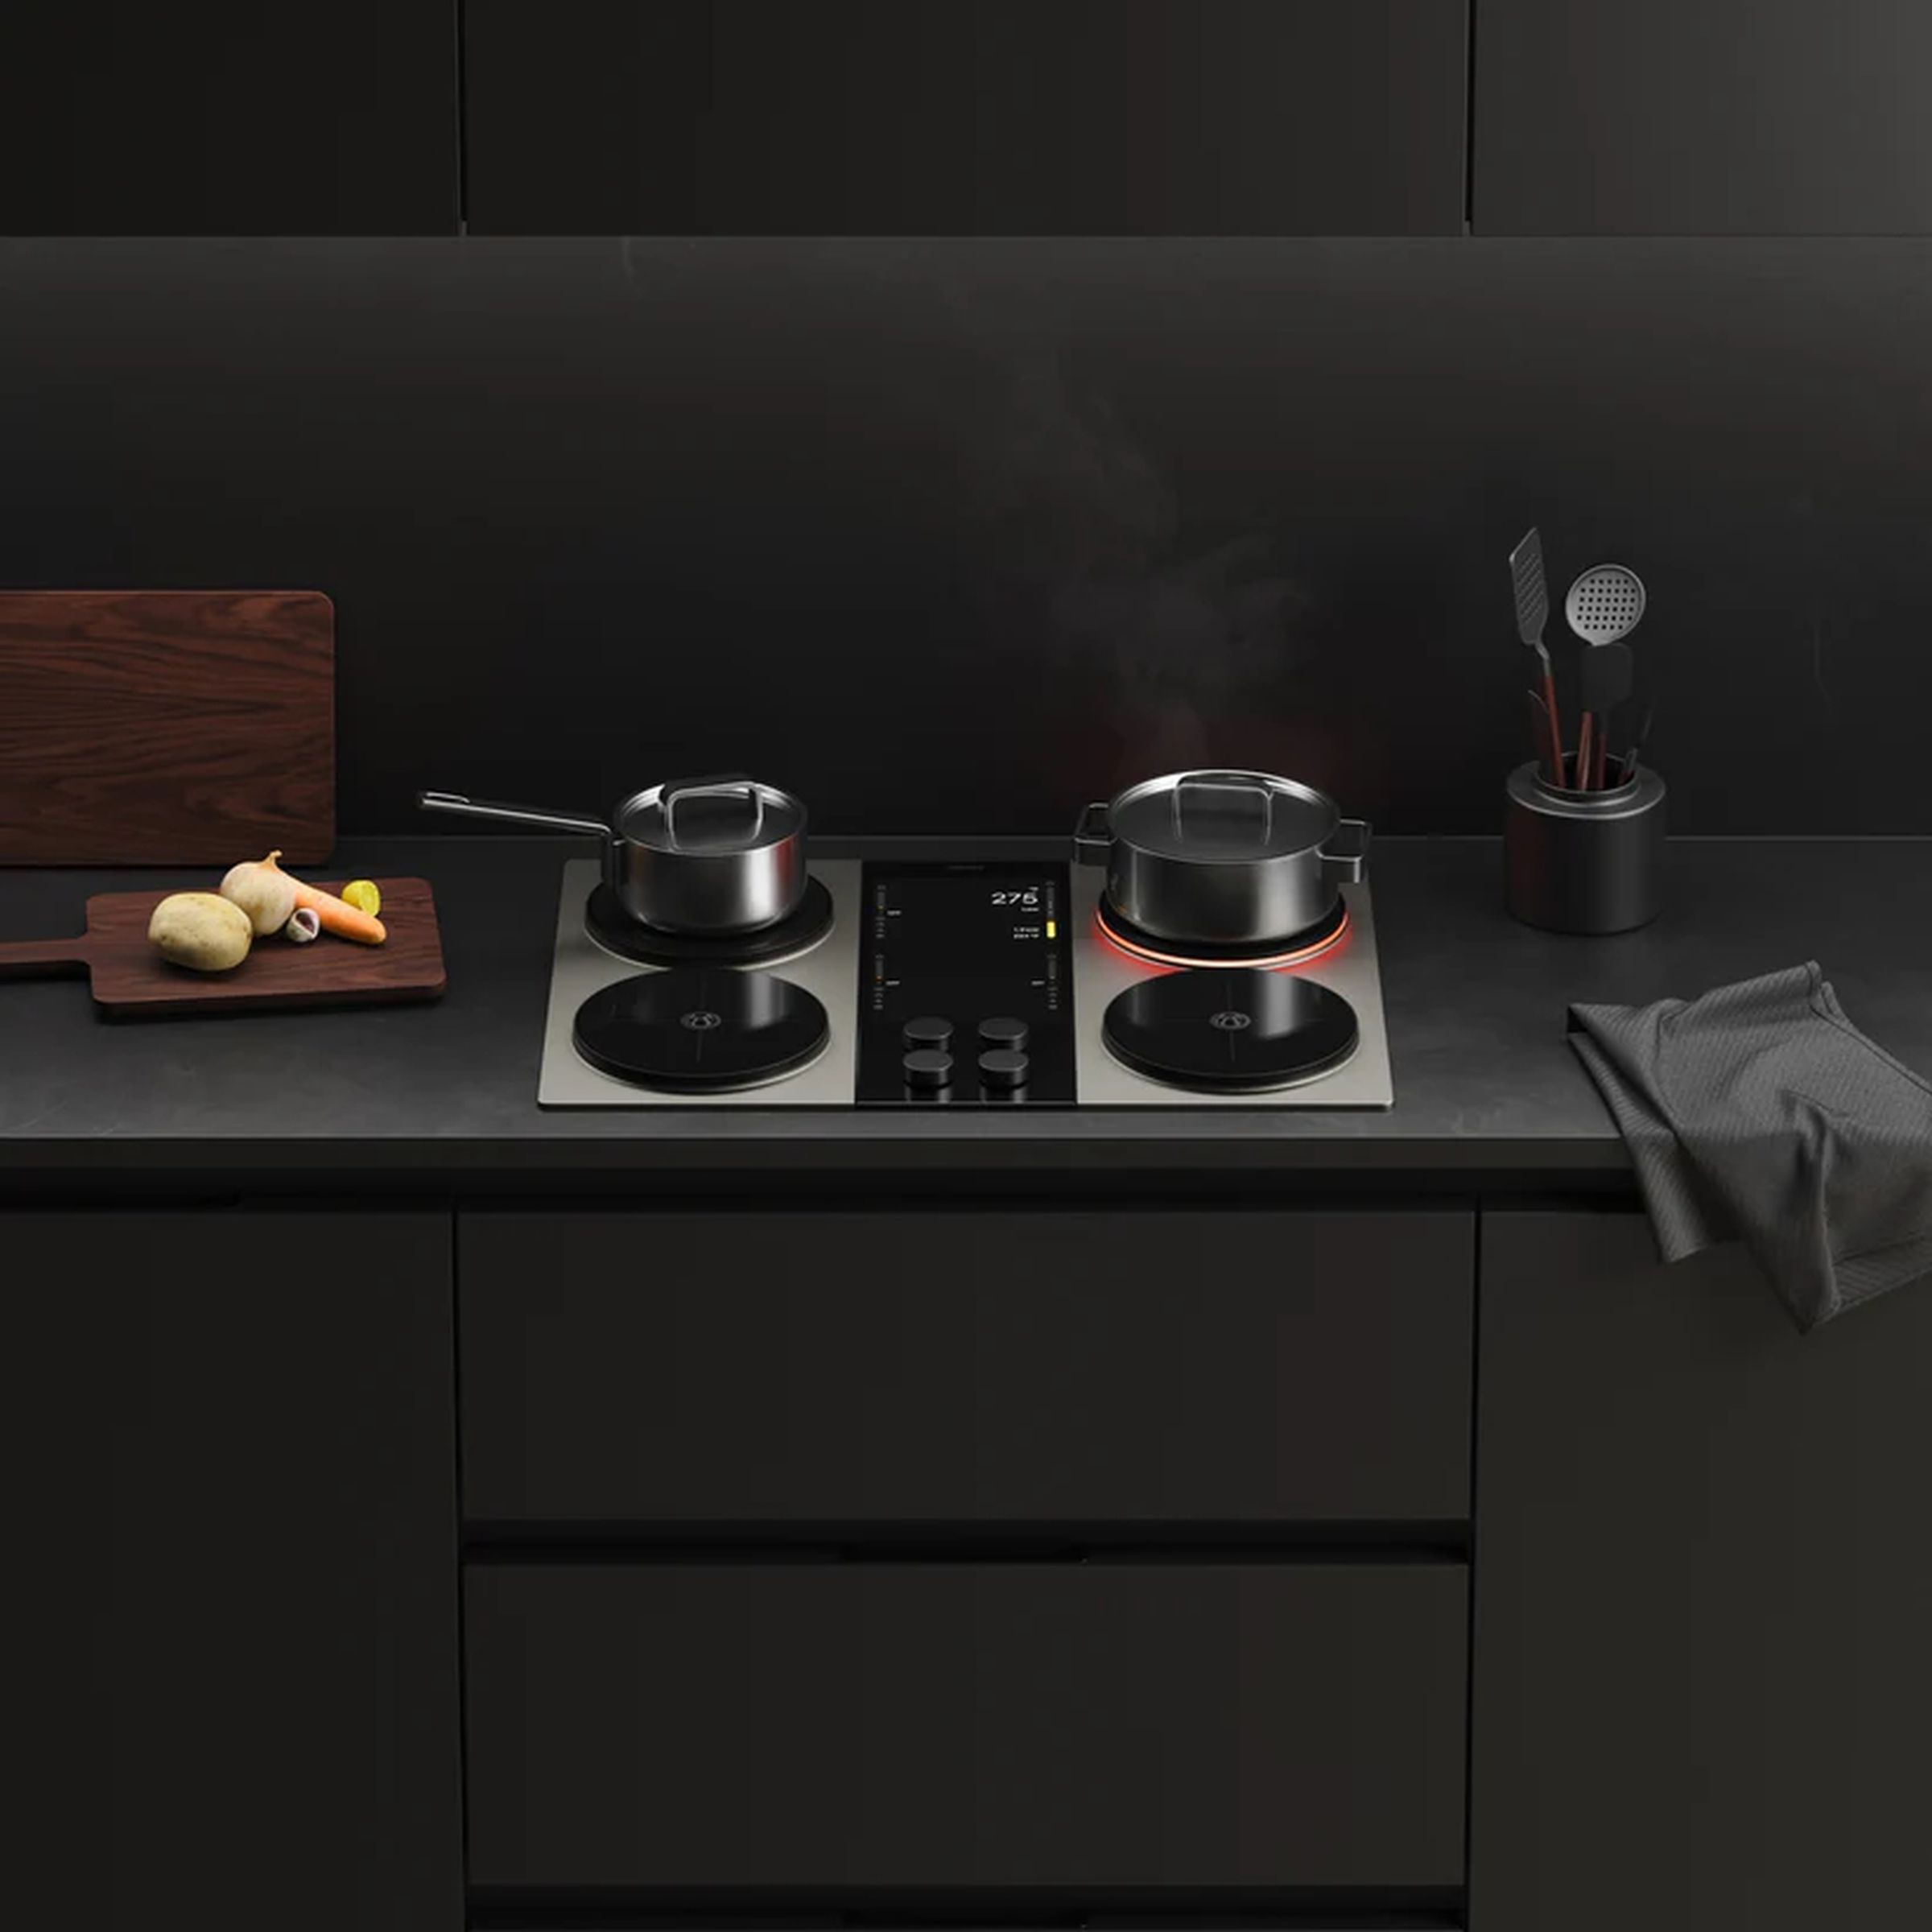 The Impulse Cooktop has four 9-inch burners with a peak performance of 10 KW. Removable magnetic knobs and an LCD interface add control and an integrated 3 kWh LFP battery adds back-up power. 